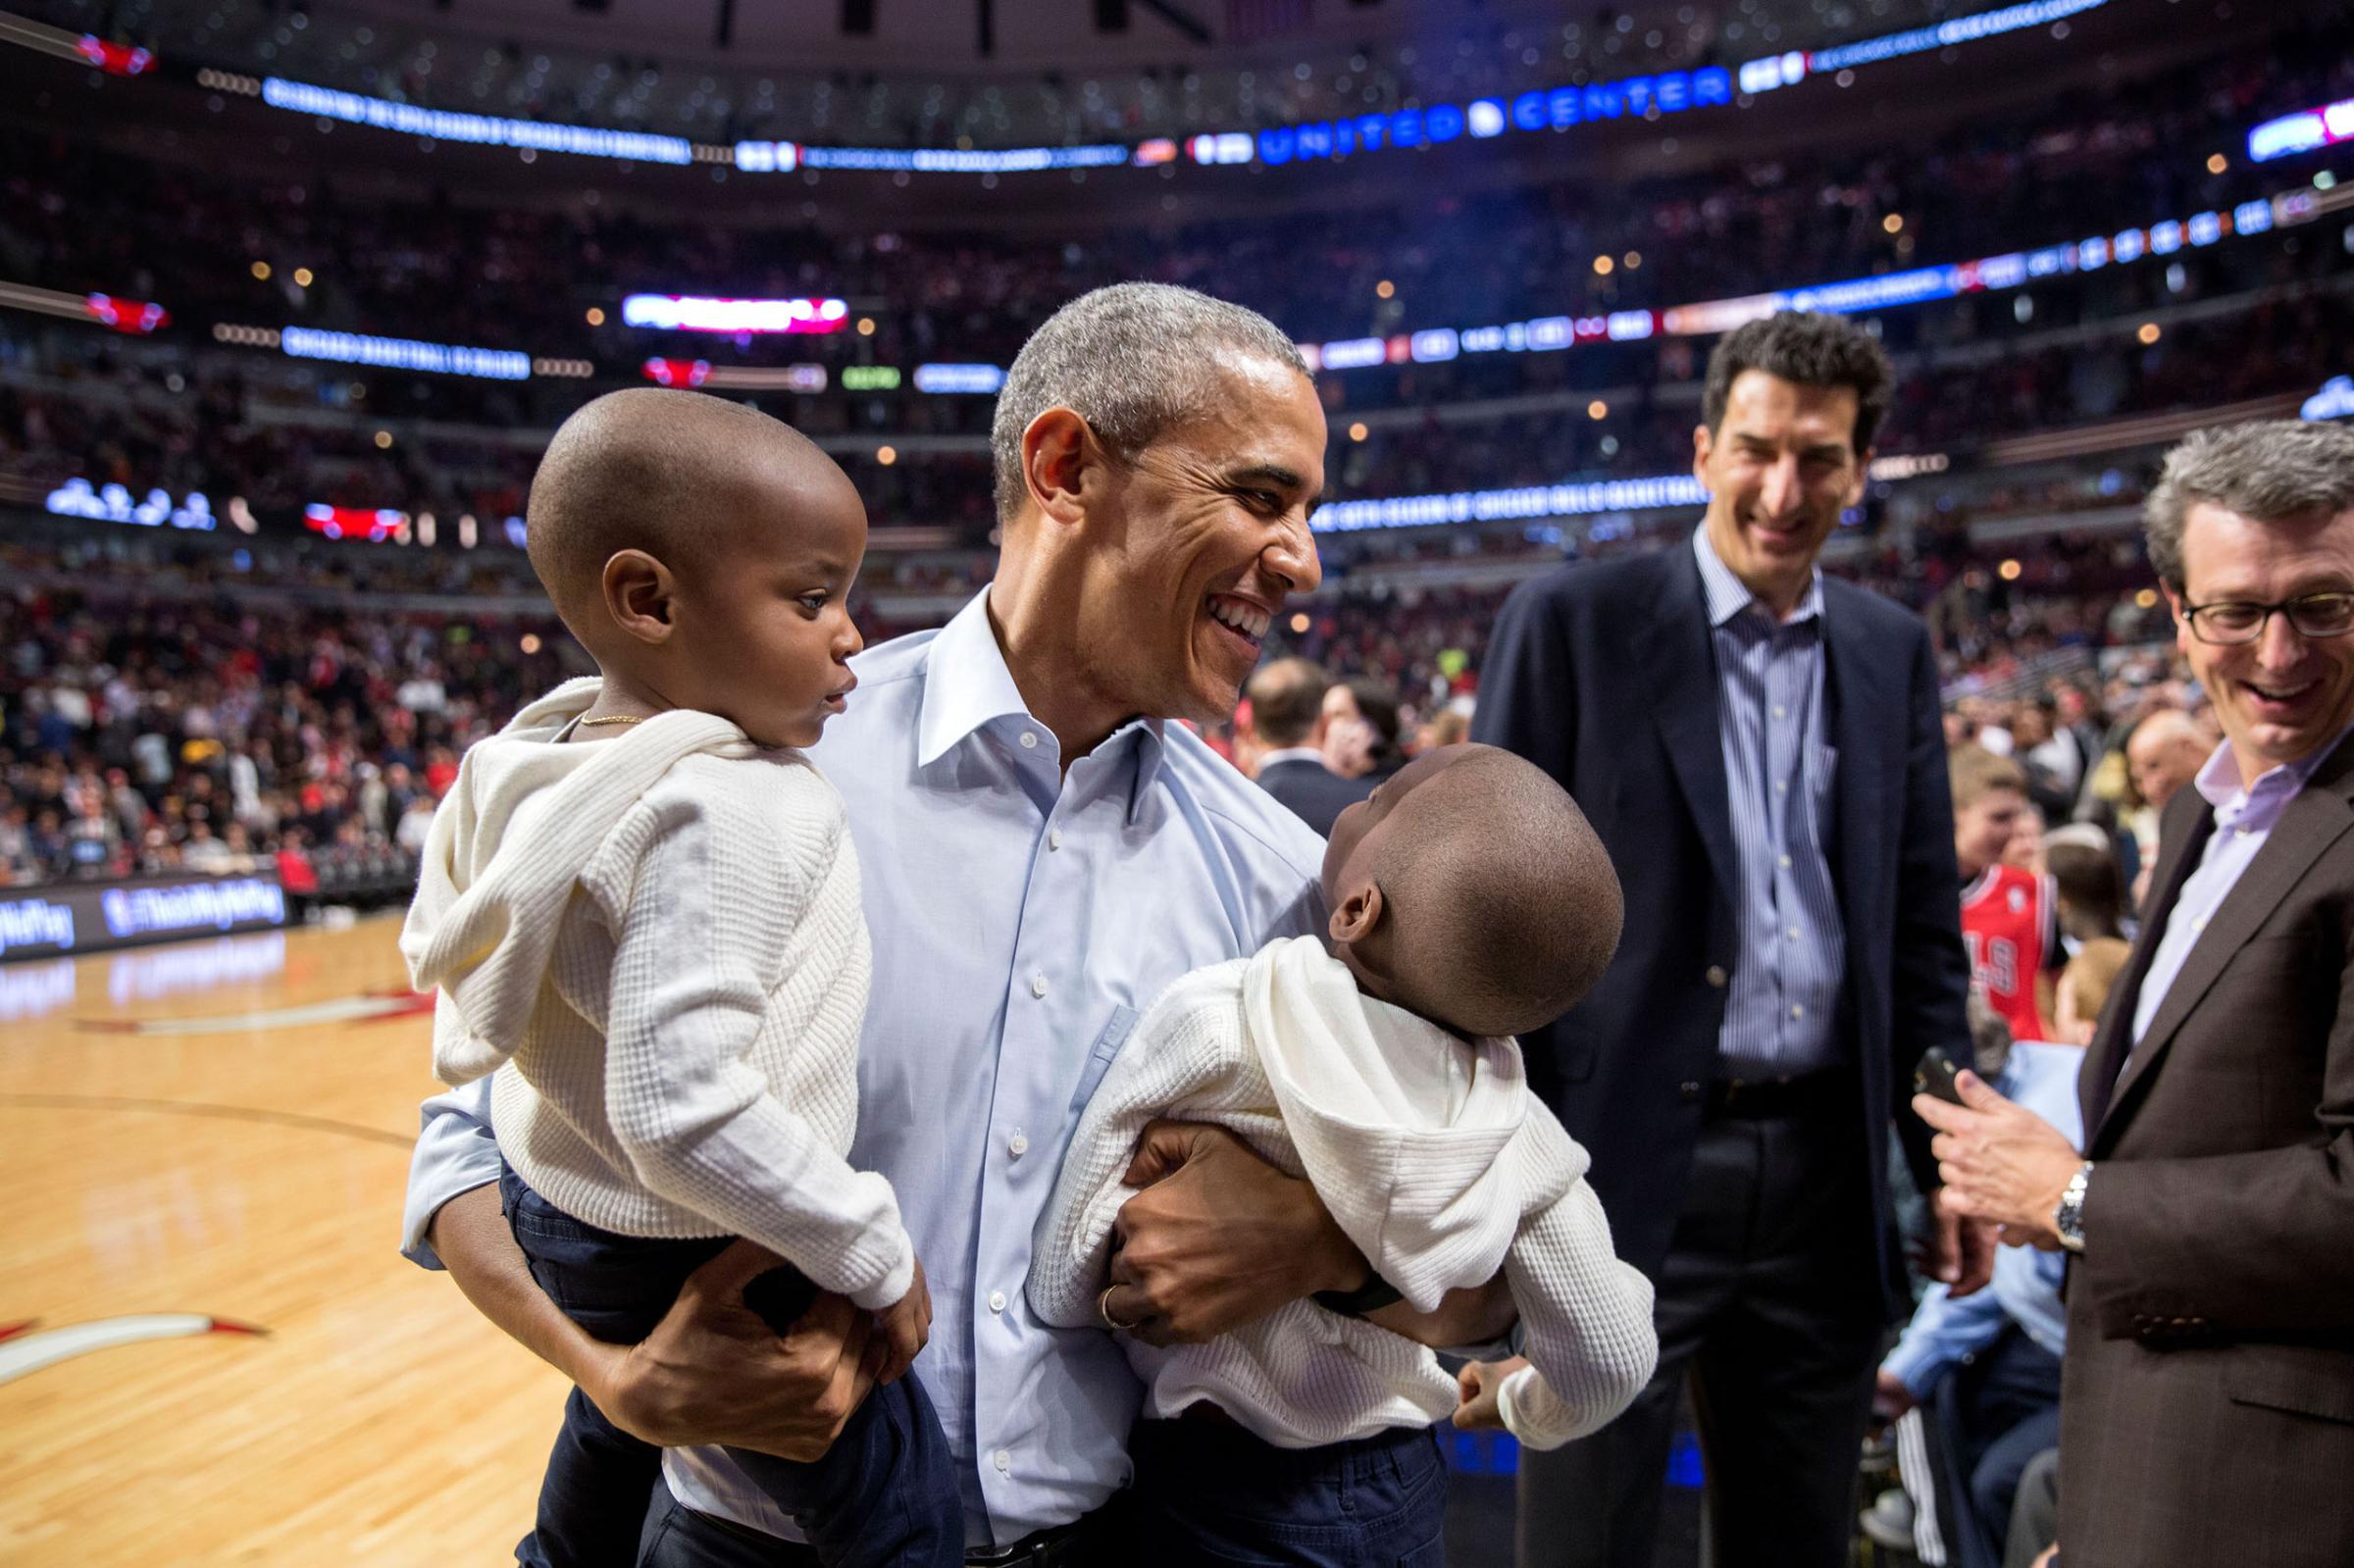 President Barack Obama holds two youngsters while posing for a photo with them during halftime of the Chicago Bulls-Cleveland Cavaliers basketball game at the United Center in Chicago, Ill., Oct. 27, 2015. (Official White House Photo by Pete Souza)This official White House photograph is being made available only for publication by news organizations and/or for personal use printing by the subject(s) of the photograph. The photograph may not be manipulated in any way and may not be used in commercial or political materials, advertisements, emails, products, promotions that in any way suggests approval or endorsement of the President, the First Family, or the White House.